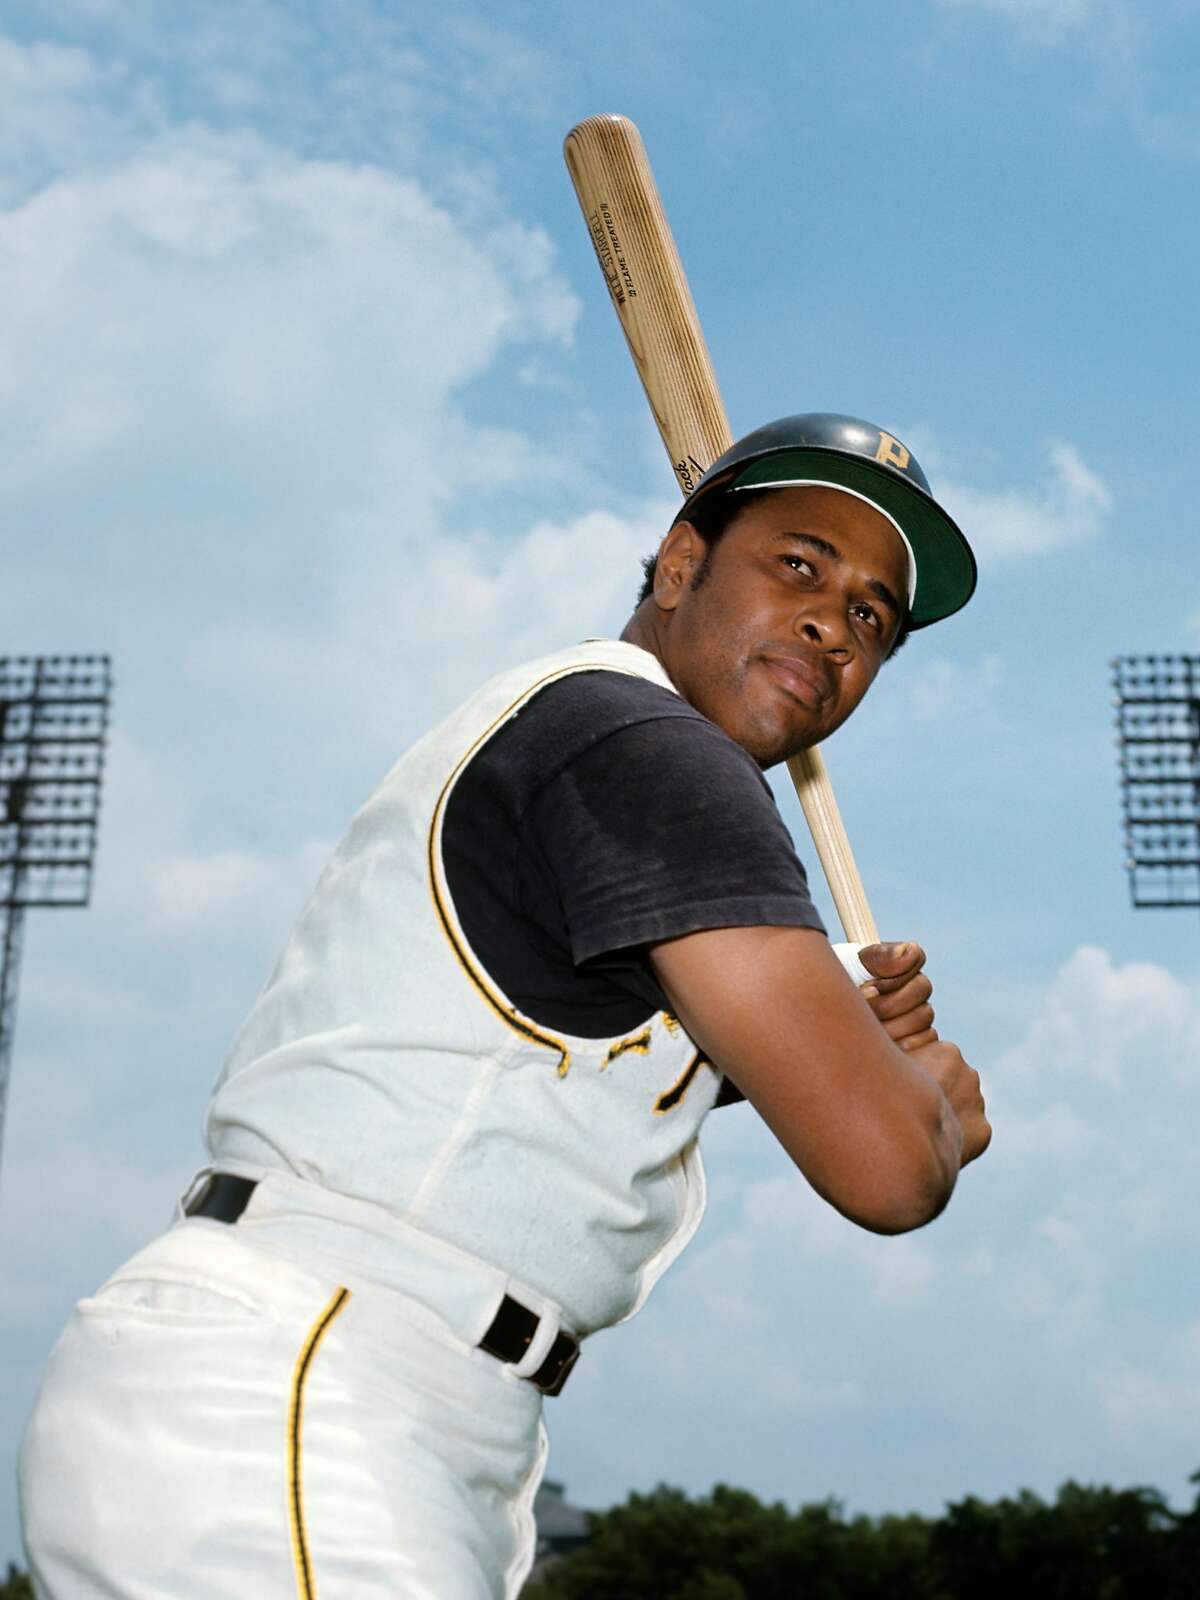 PITTSBURGH, PA - 1968: Outfielder Willie Stargell, of the Pittsburgh Pirates, poses for a protrait prior to a game in 1968 at Forbes Field in Pittsburgh, Pennsylvania. (Photo by: Diamond Images/Getty Images)